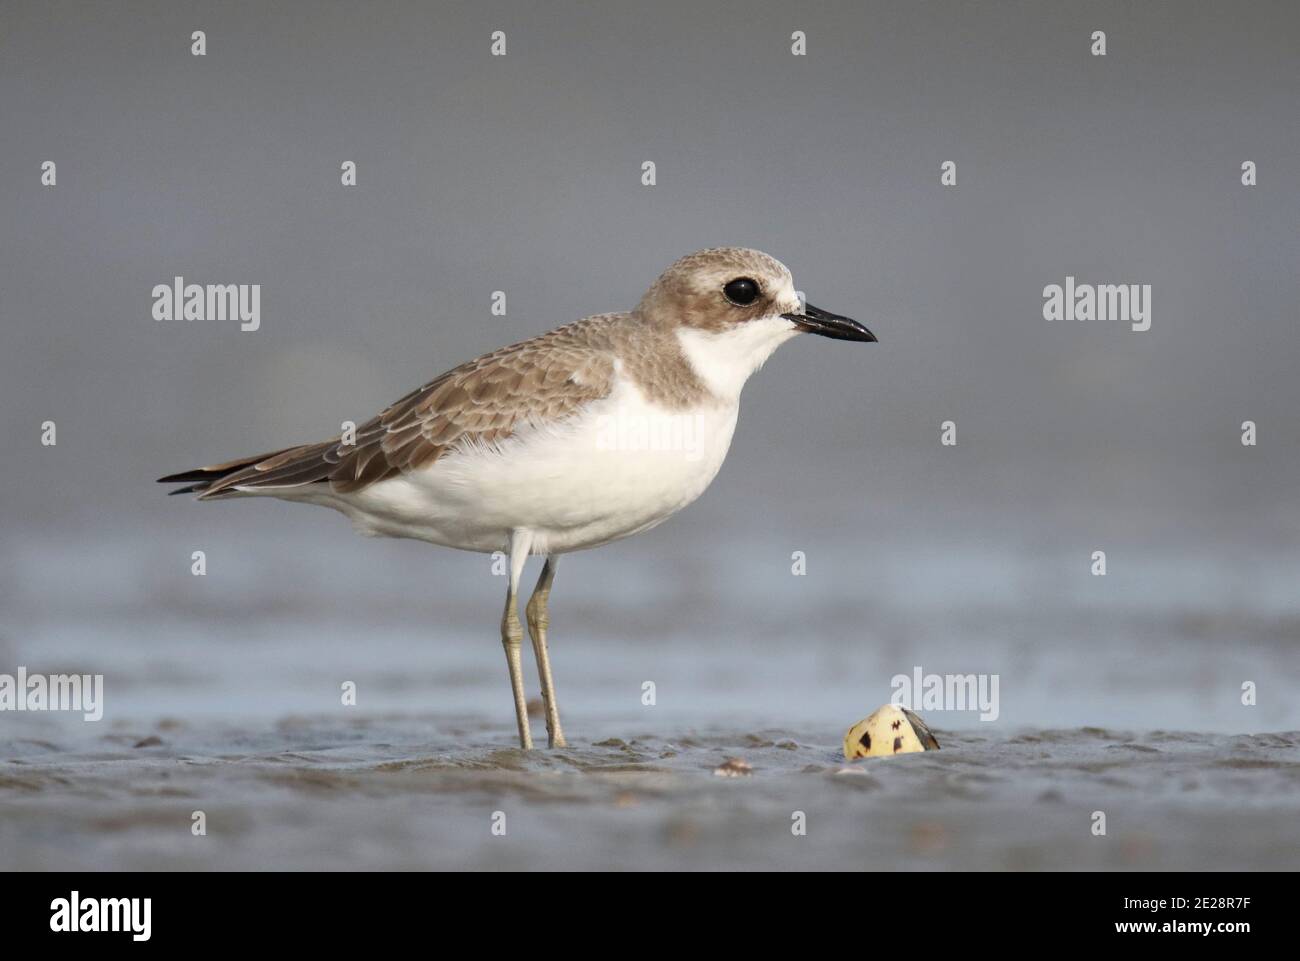 great sand plover (Charadrius leschenaultii), Winter plumaged adult Greater Sand Plover standing on mud flat, China, Guangdon, Xitou Stock Photo